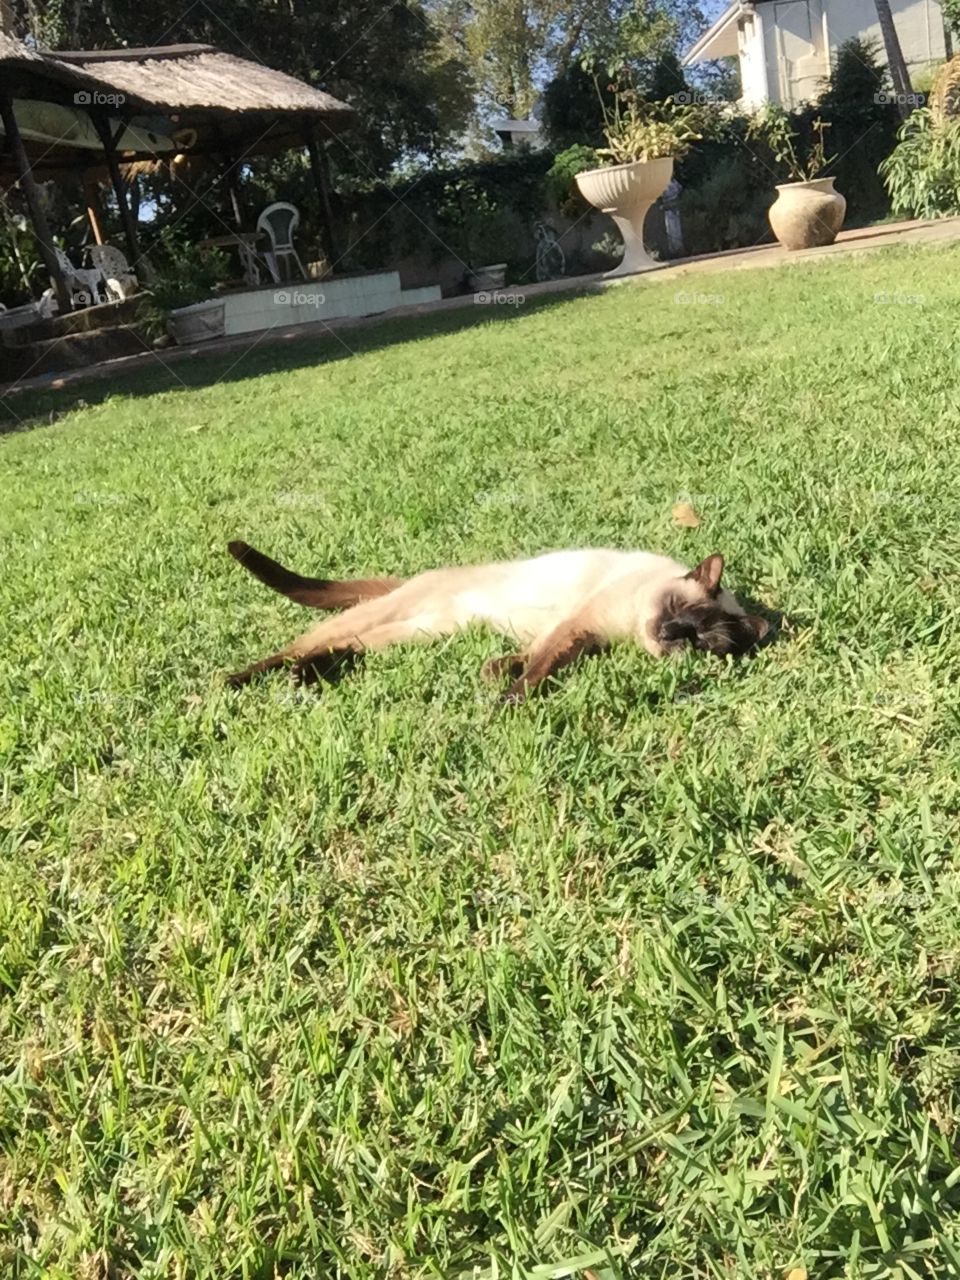 Ultimate relaxation during a South African winter 
#siamese #green #SouthAfrica 